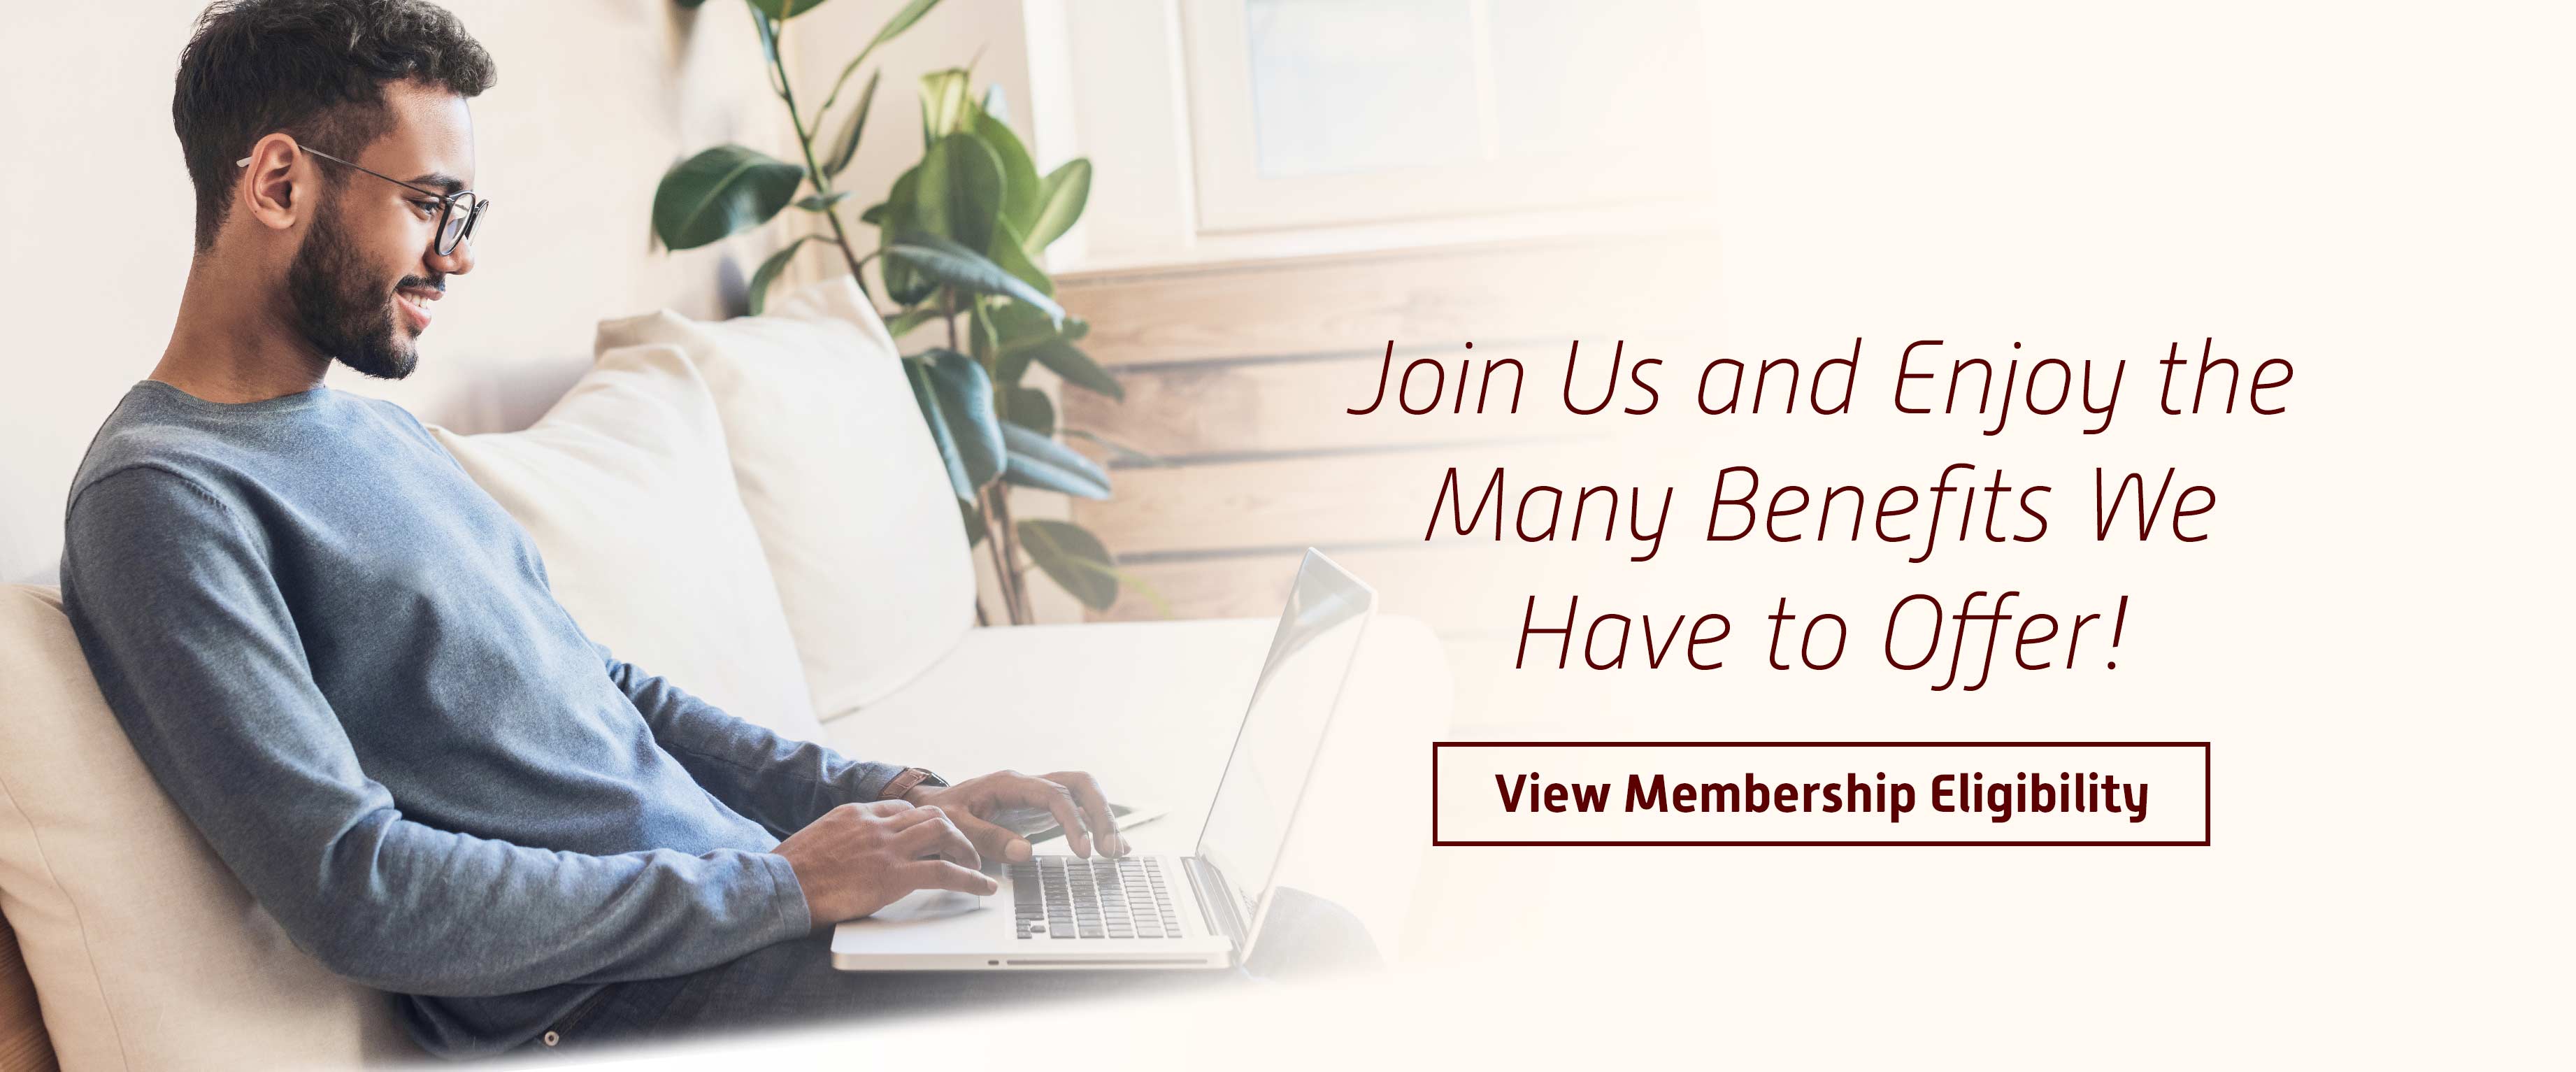 Join us and enjoy the many benefits we have to offer! View Membership Eligibility